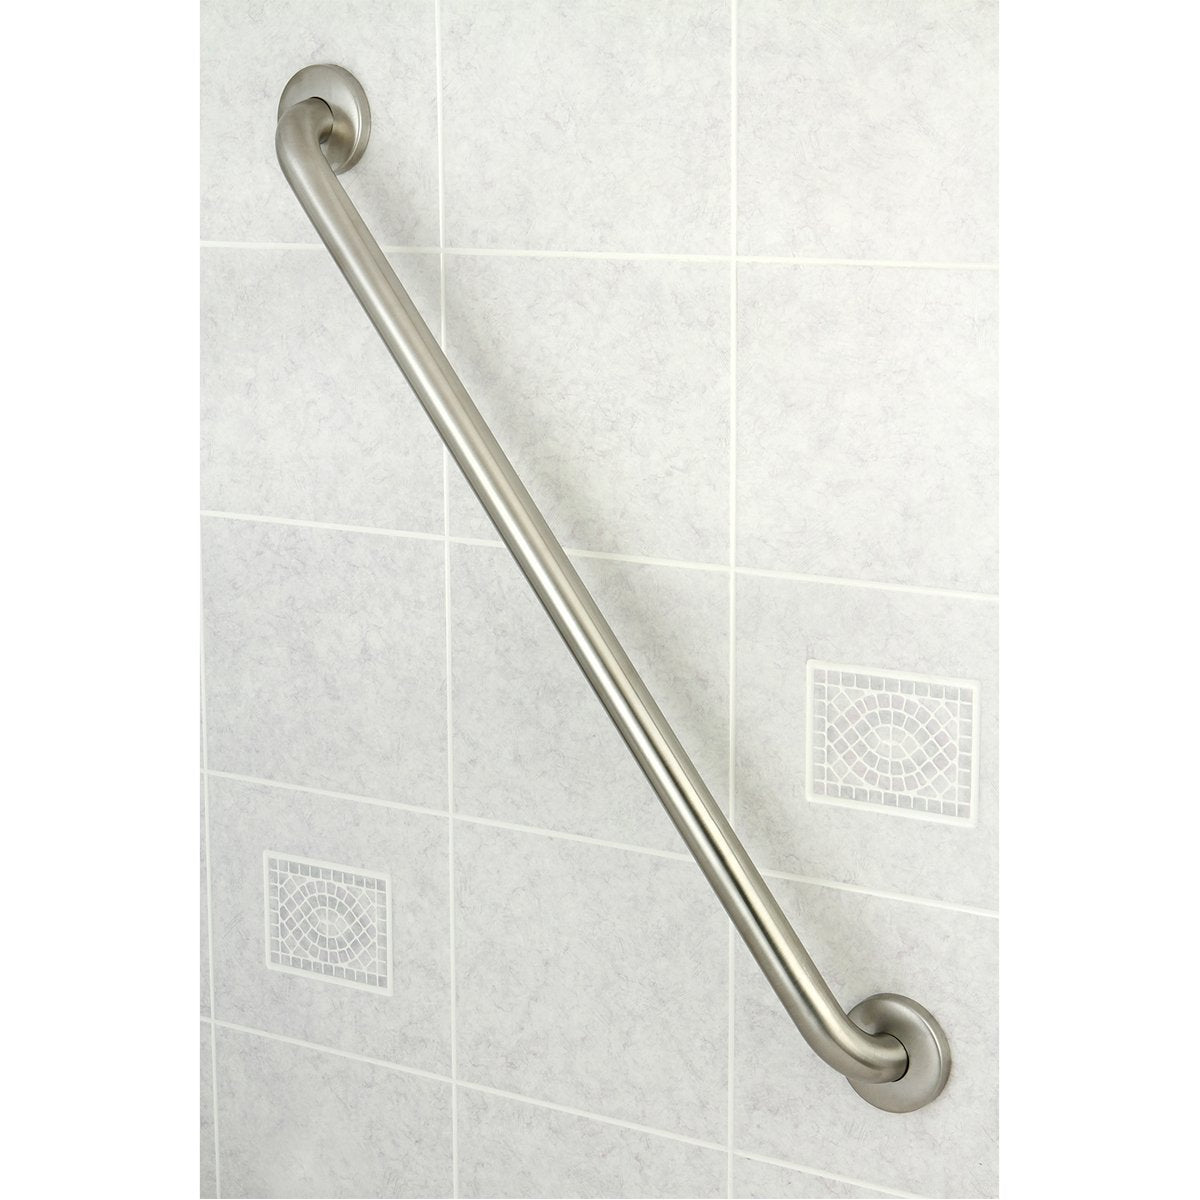 Kingston Brass Made to Match Commercial Grade Satin Nickel Grab Bar-Concealed Screws-Bathroom Accessories-Free Shipping-Directsinks.